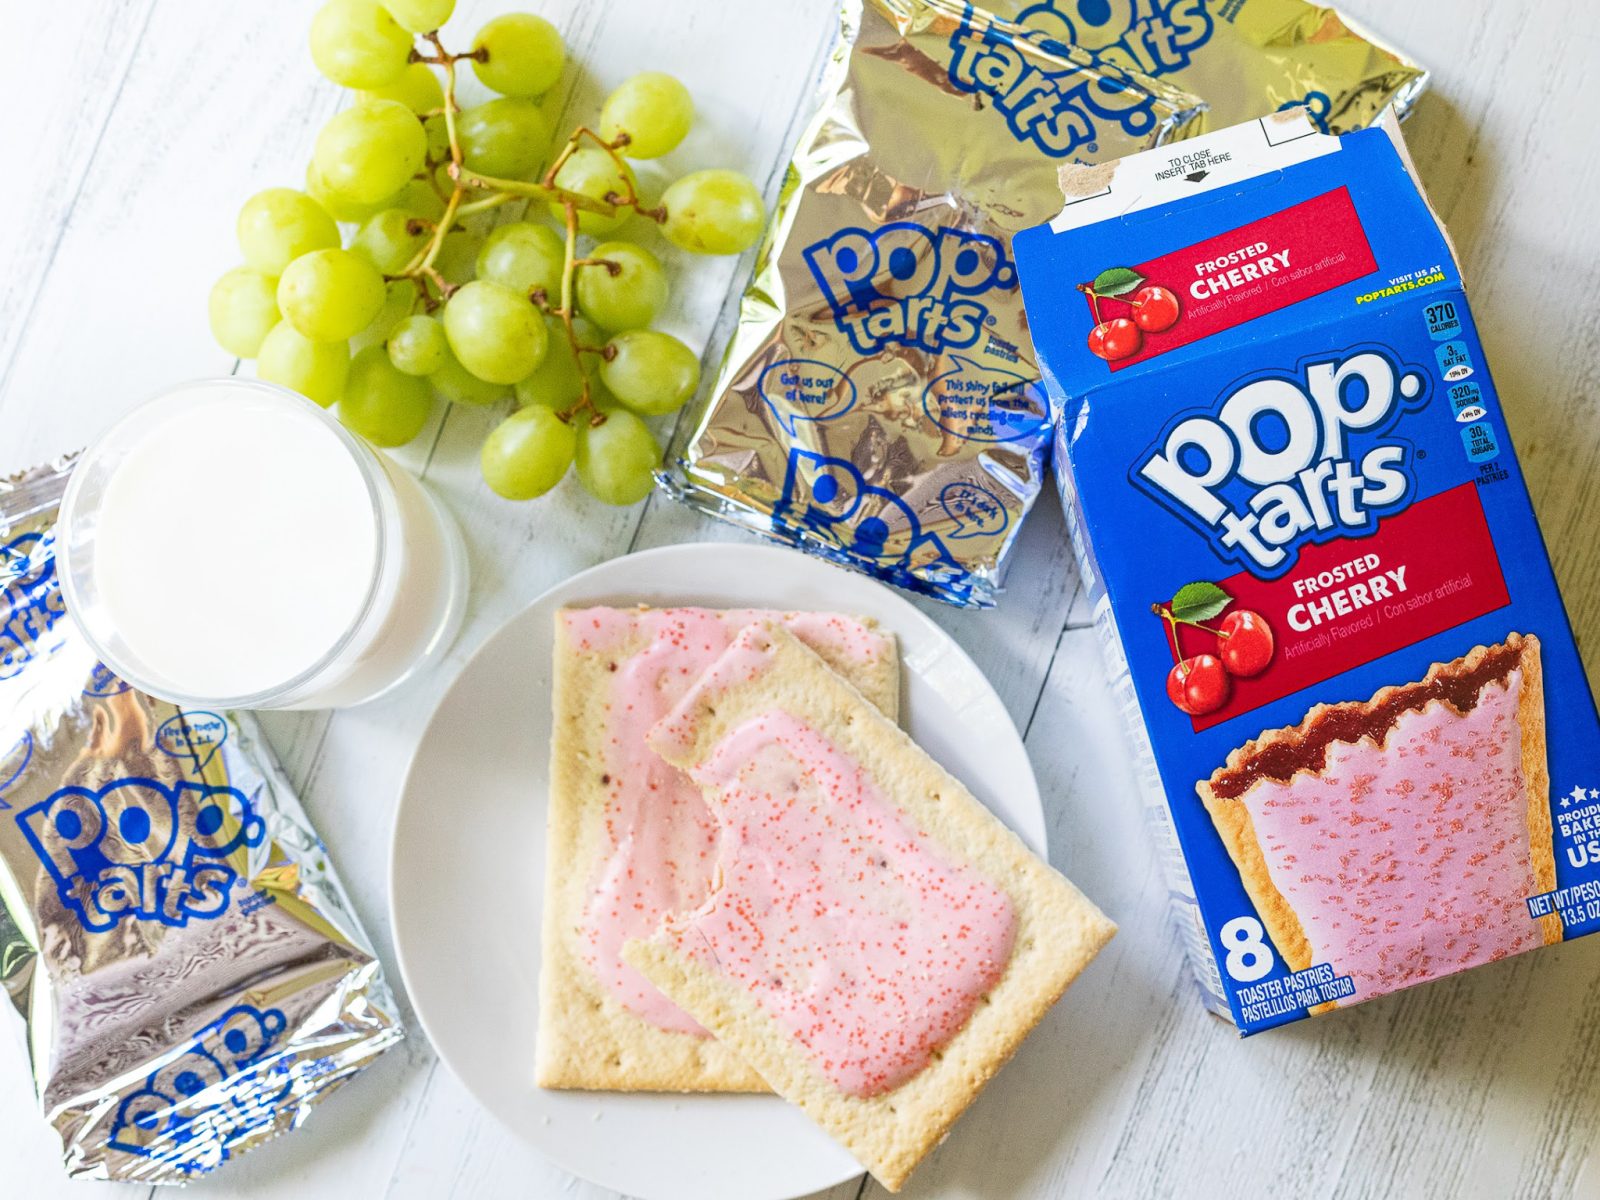 Kellogg’s Pop-Tarts Are On Sale This Week At Publix – Get The Boxes As Low As $1.50